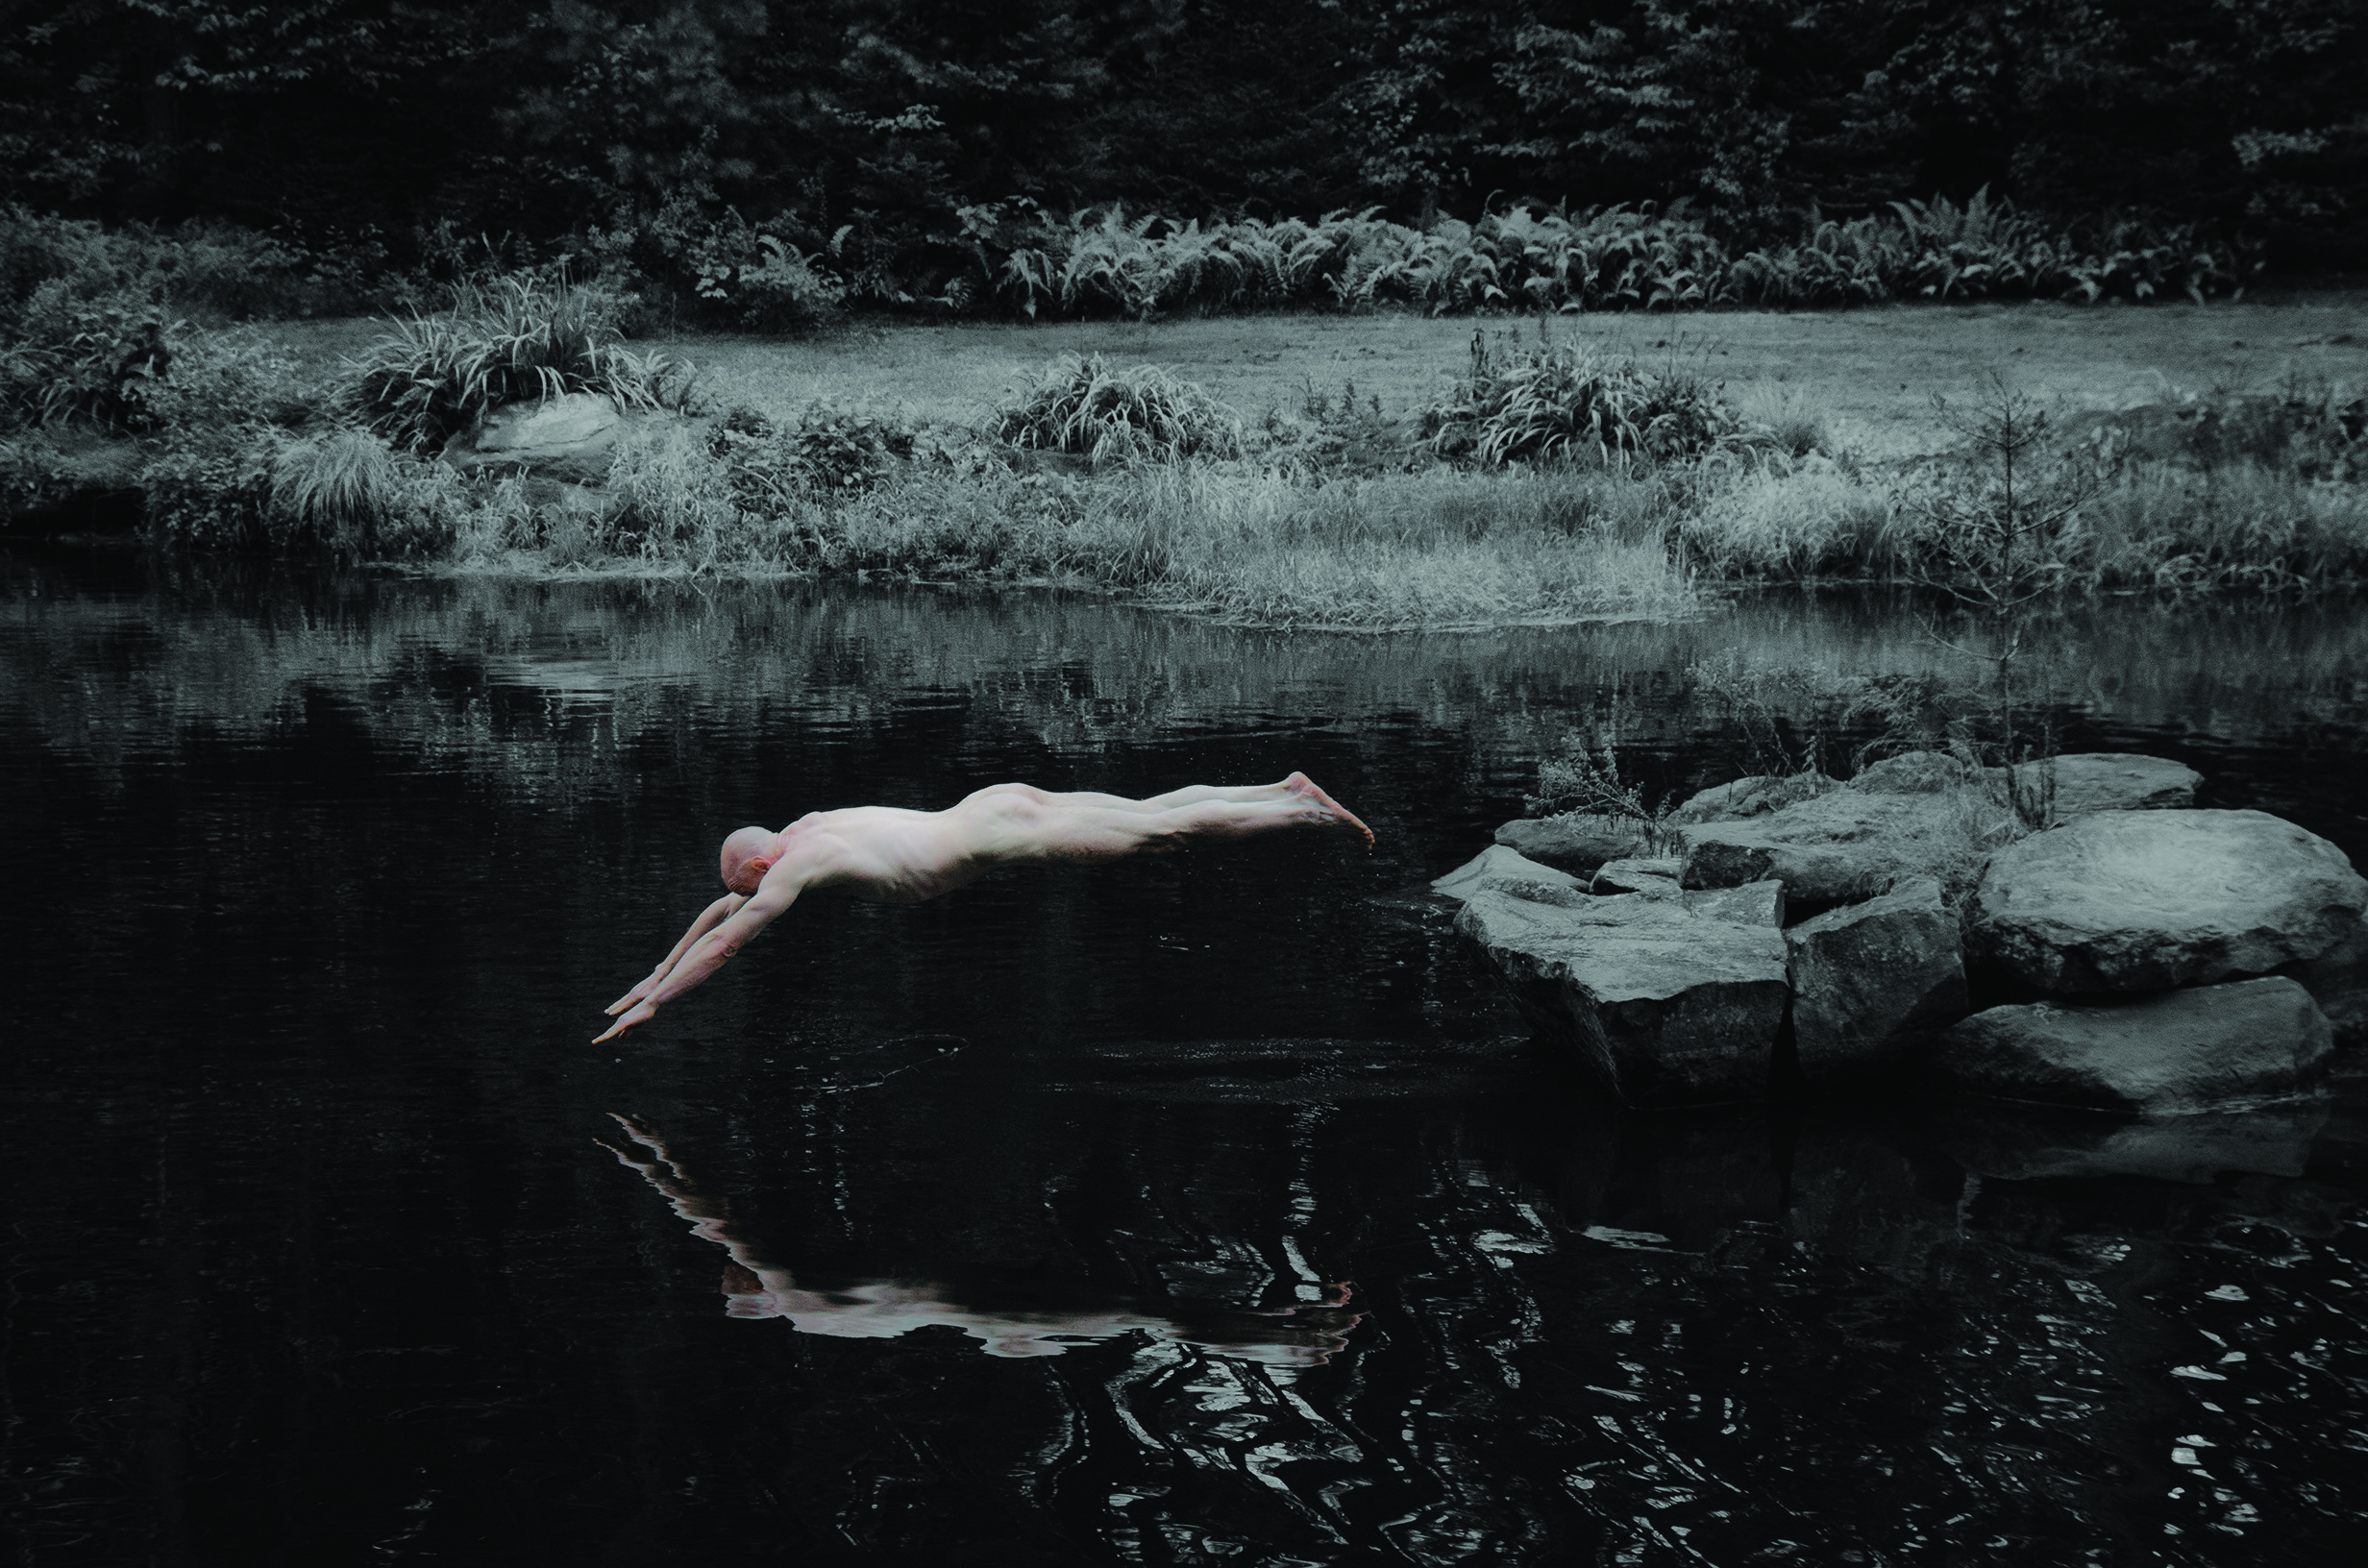 Naked man diving into water